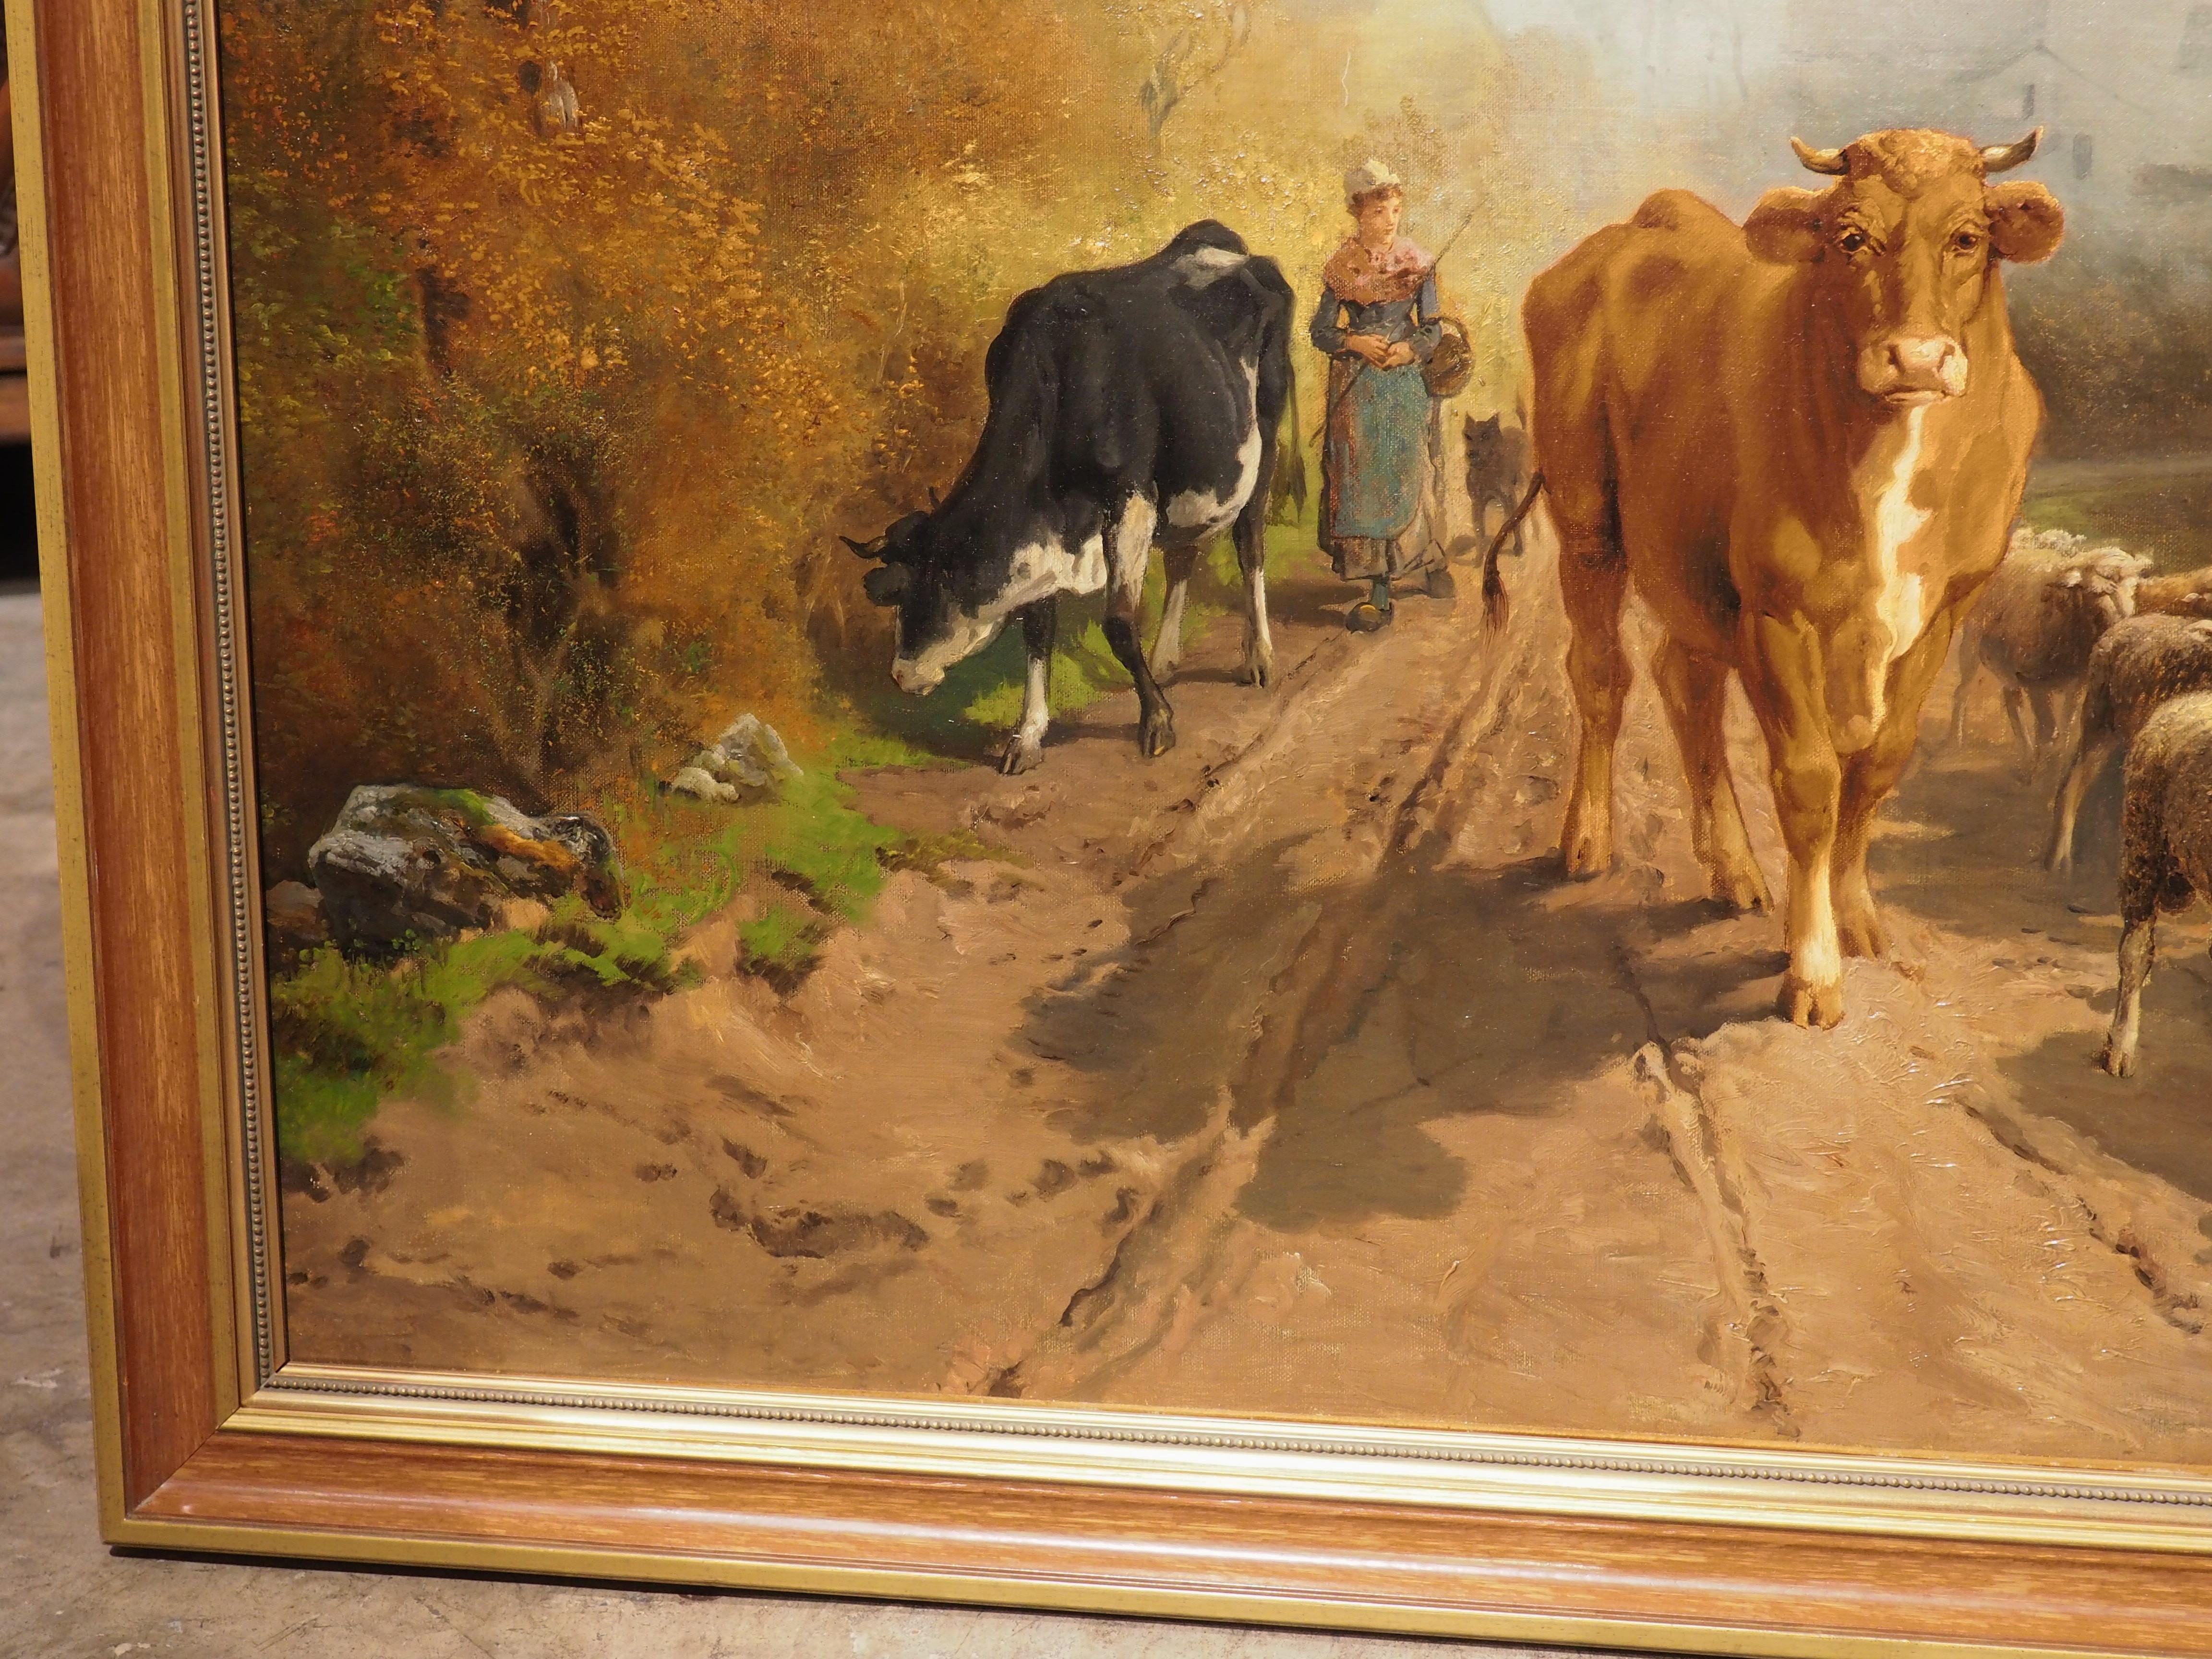 This large pastoral oil painting (nearly 51 inches long) portraying a woman walking among animals, has been signed and dated in the lower right by the artist, “Theo Levigne 1883”. The frame features gilded edges adorned with beading that flank brown